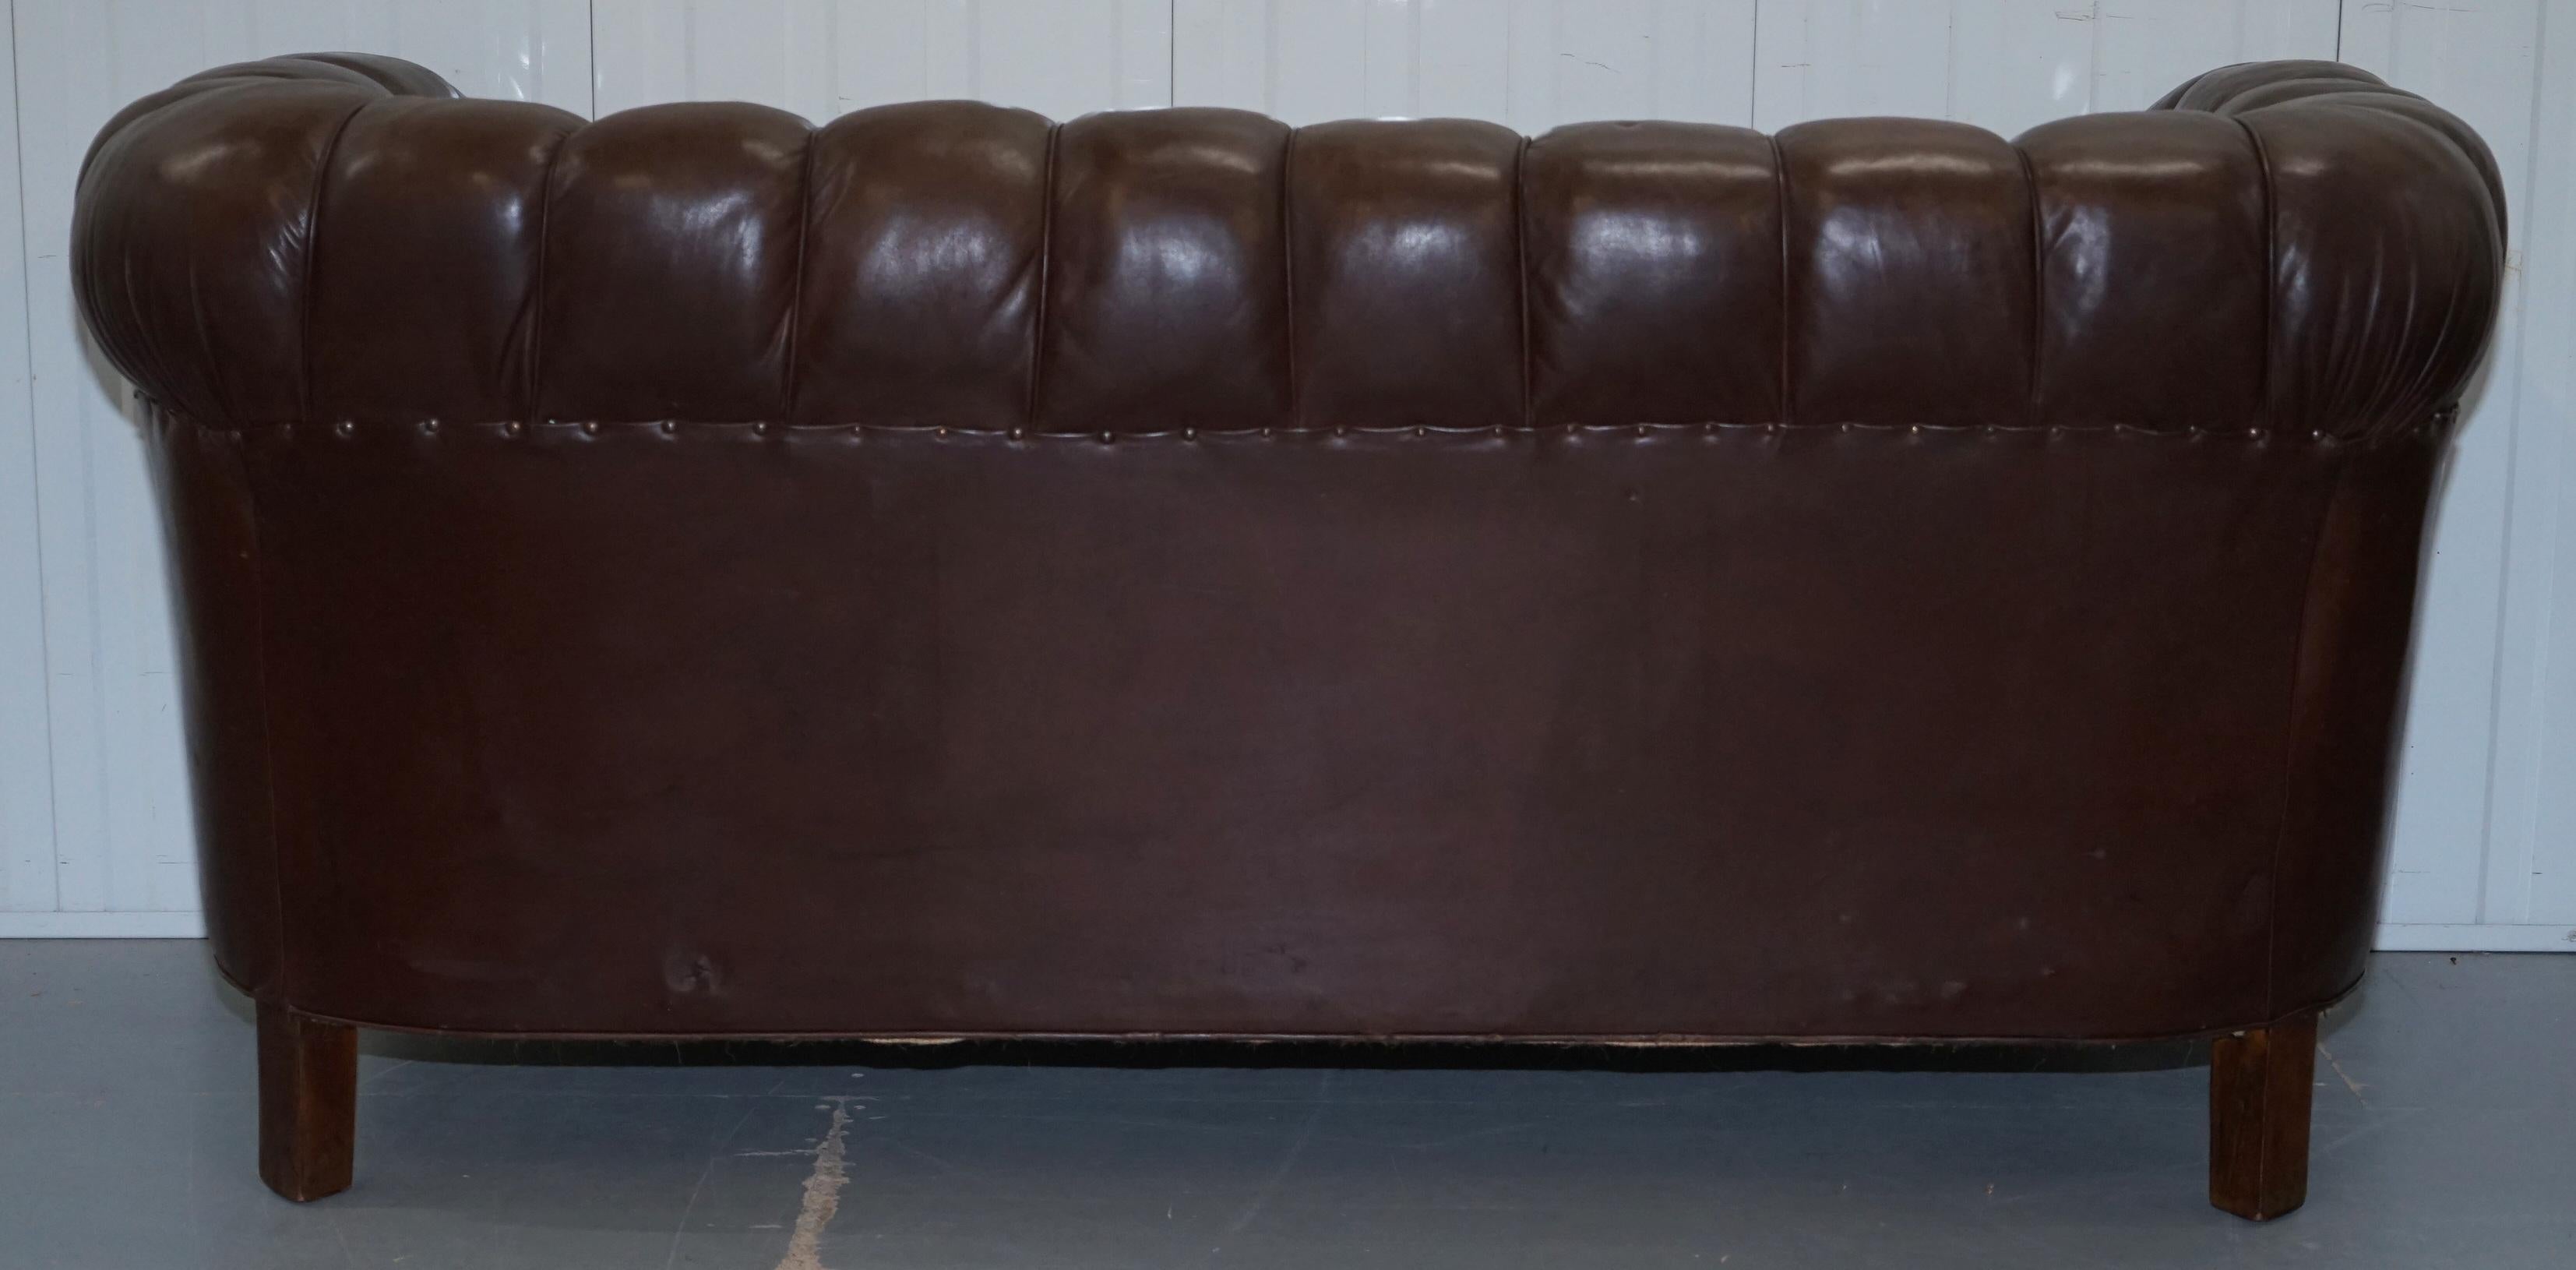 Original Victorian 1890 Swedish Aged Brown Leather Chesterfield Full Sprung Sofa 11